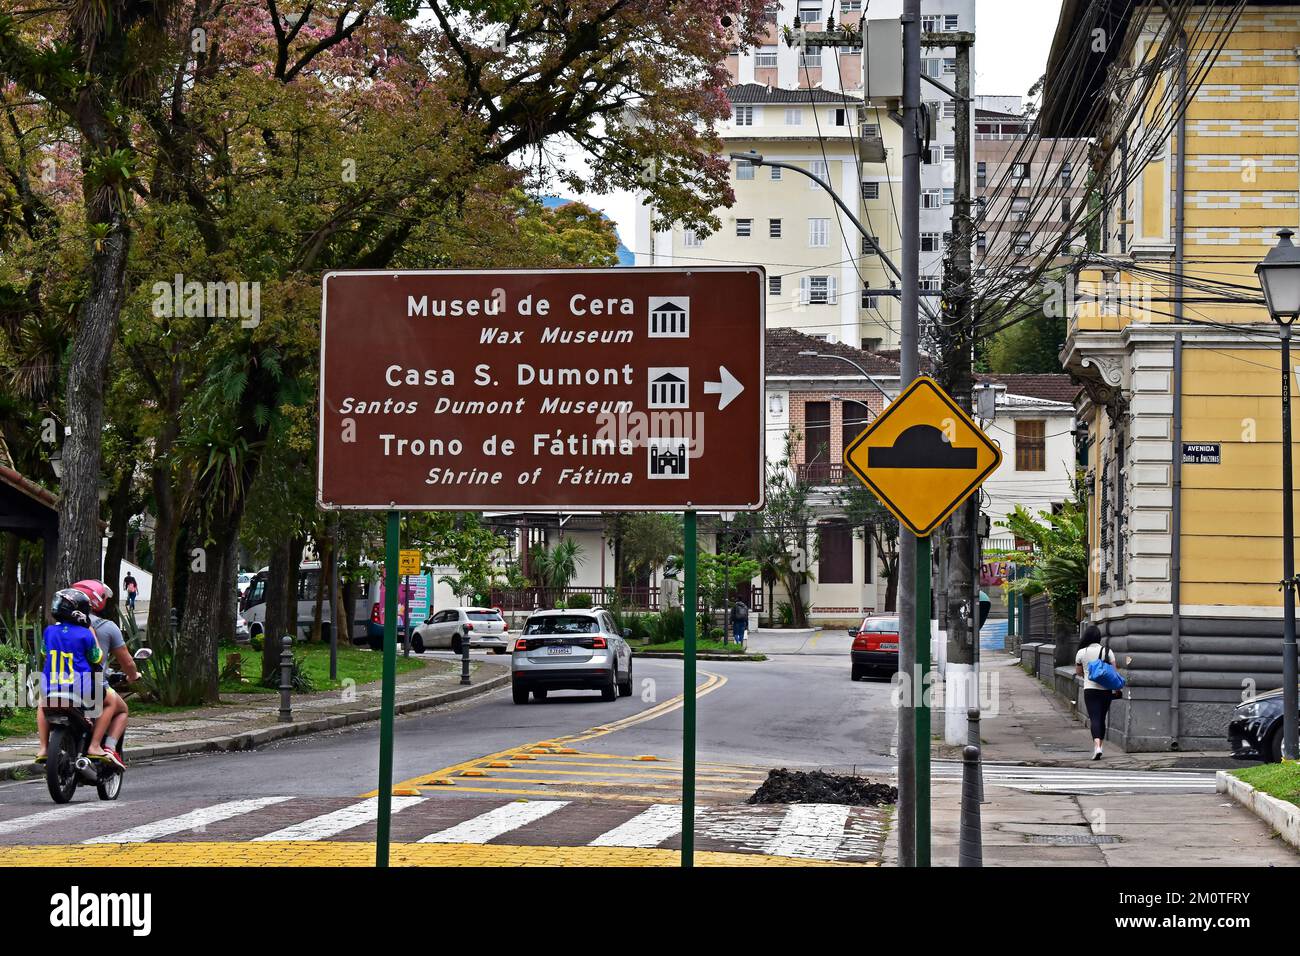 PETROPOLIS, RIO DE JANEIRO, BRAZIL - October 28, 2022: Street sign indicating the direction of tourist attractions Stock Photo